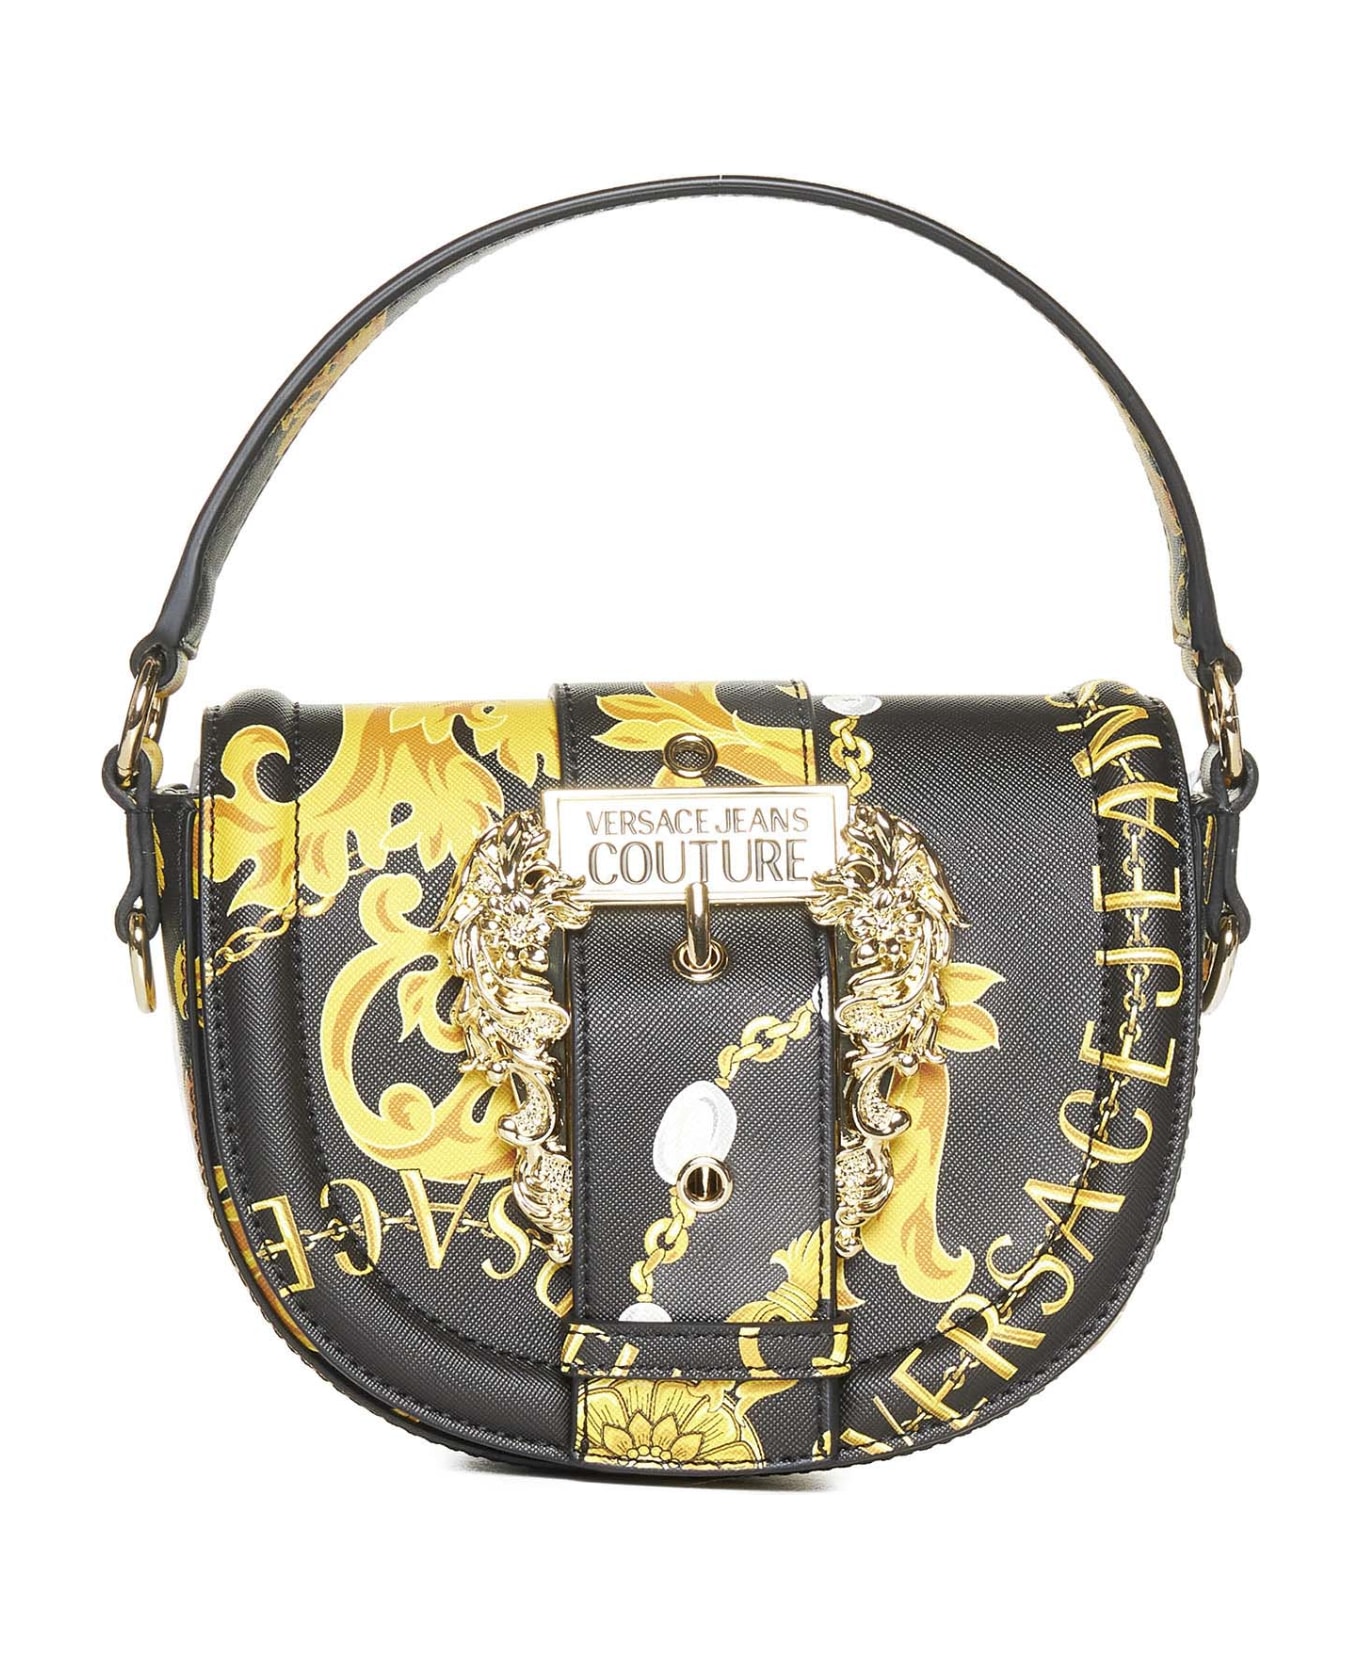 Versace Jeans Couture Bag - Black gold